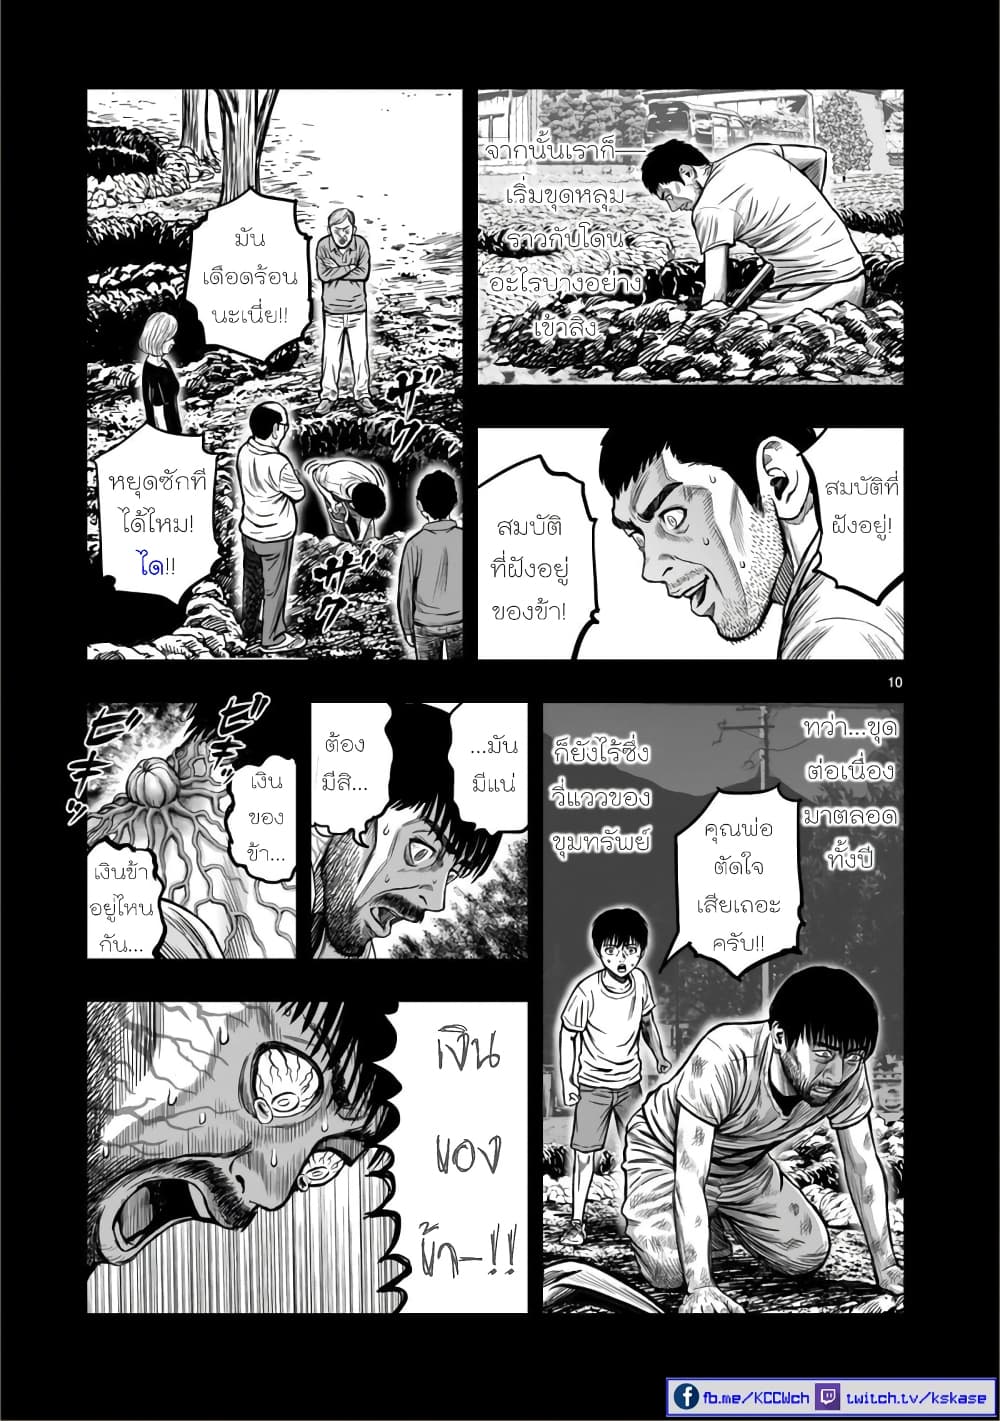 Rooster Fighter 10 (9)